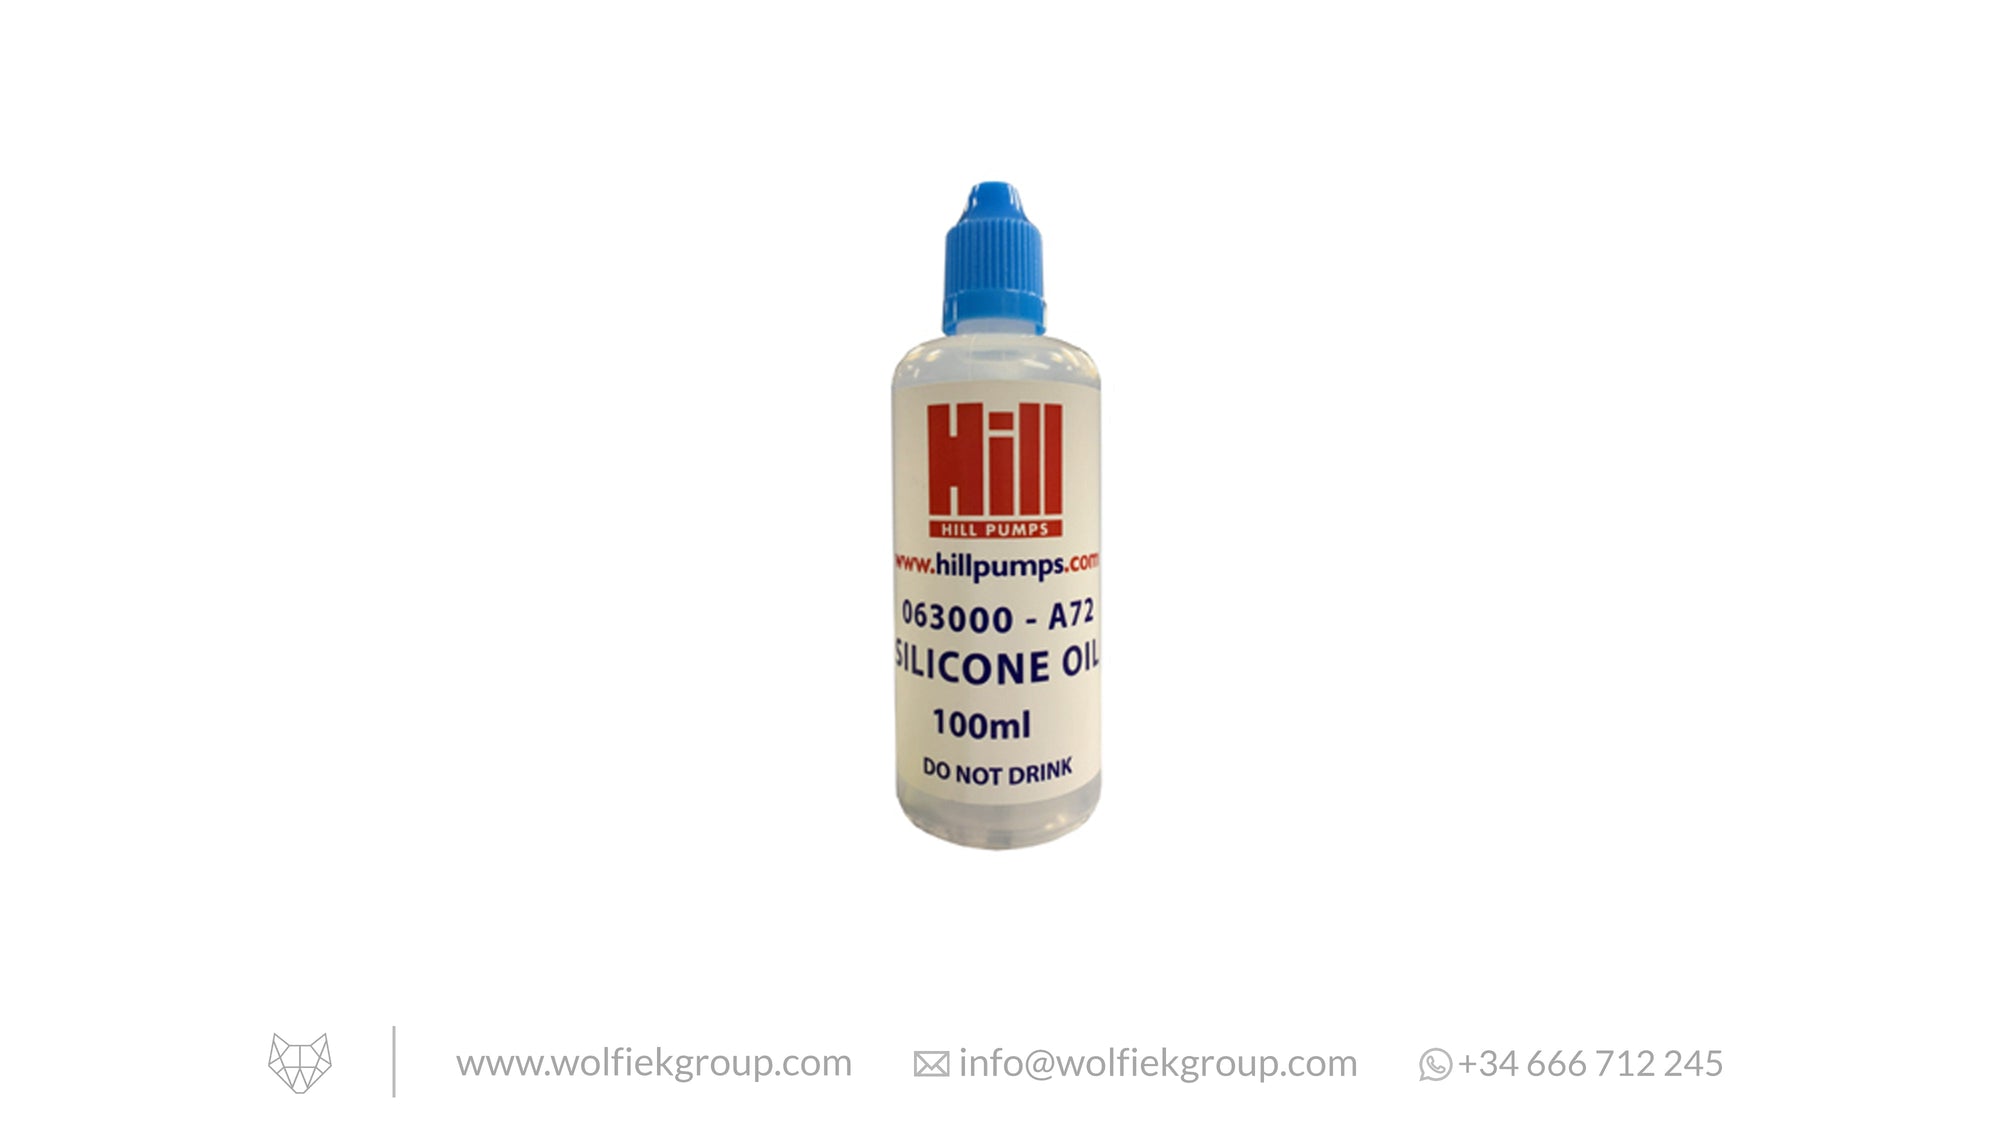 Replacement 100ml Silicone Oil